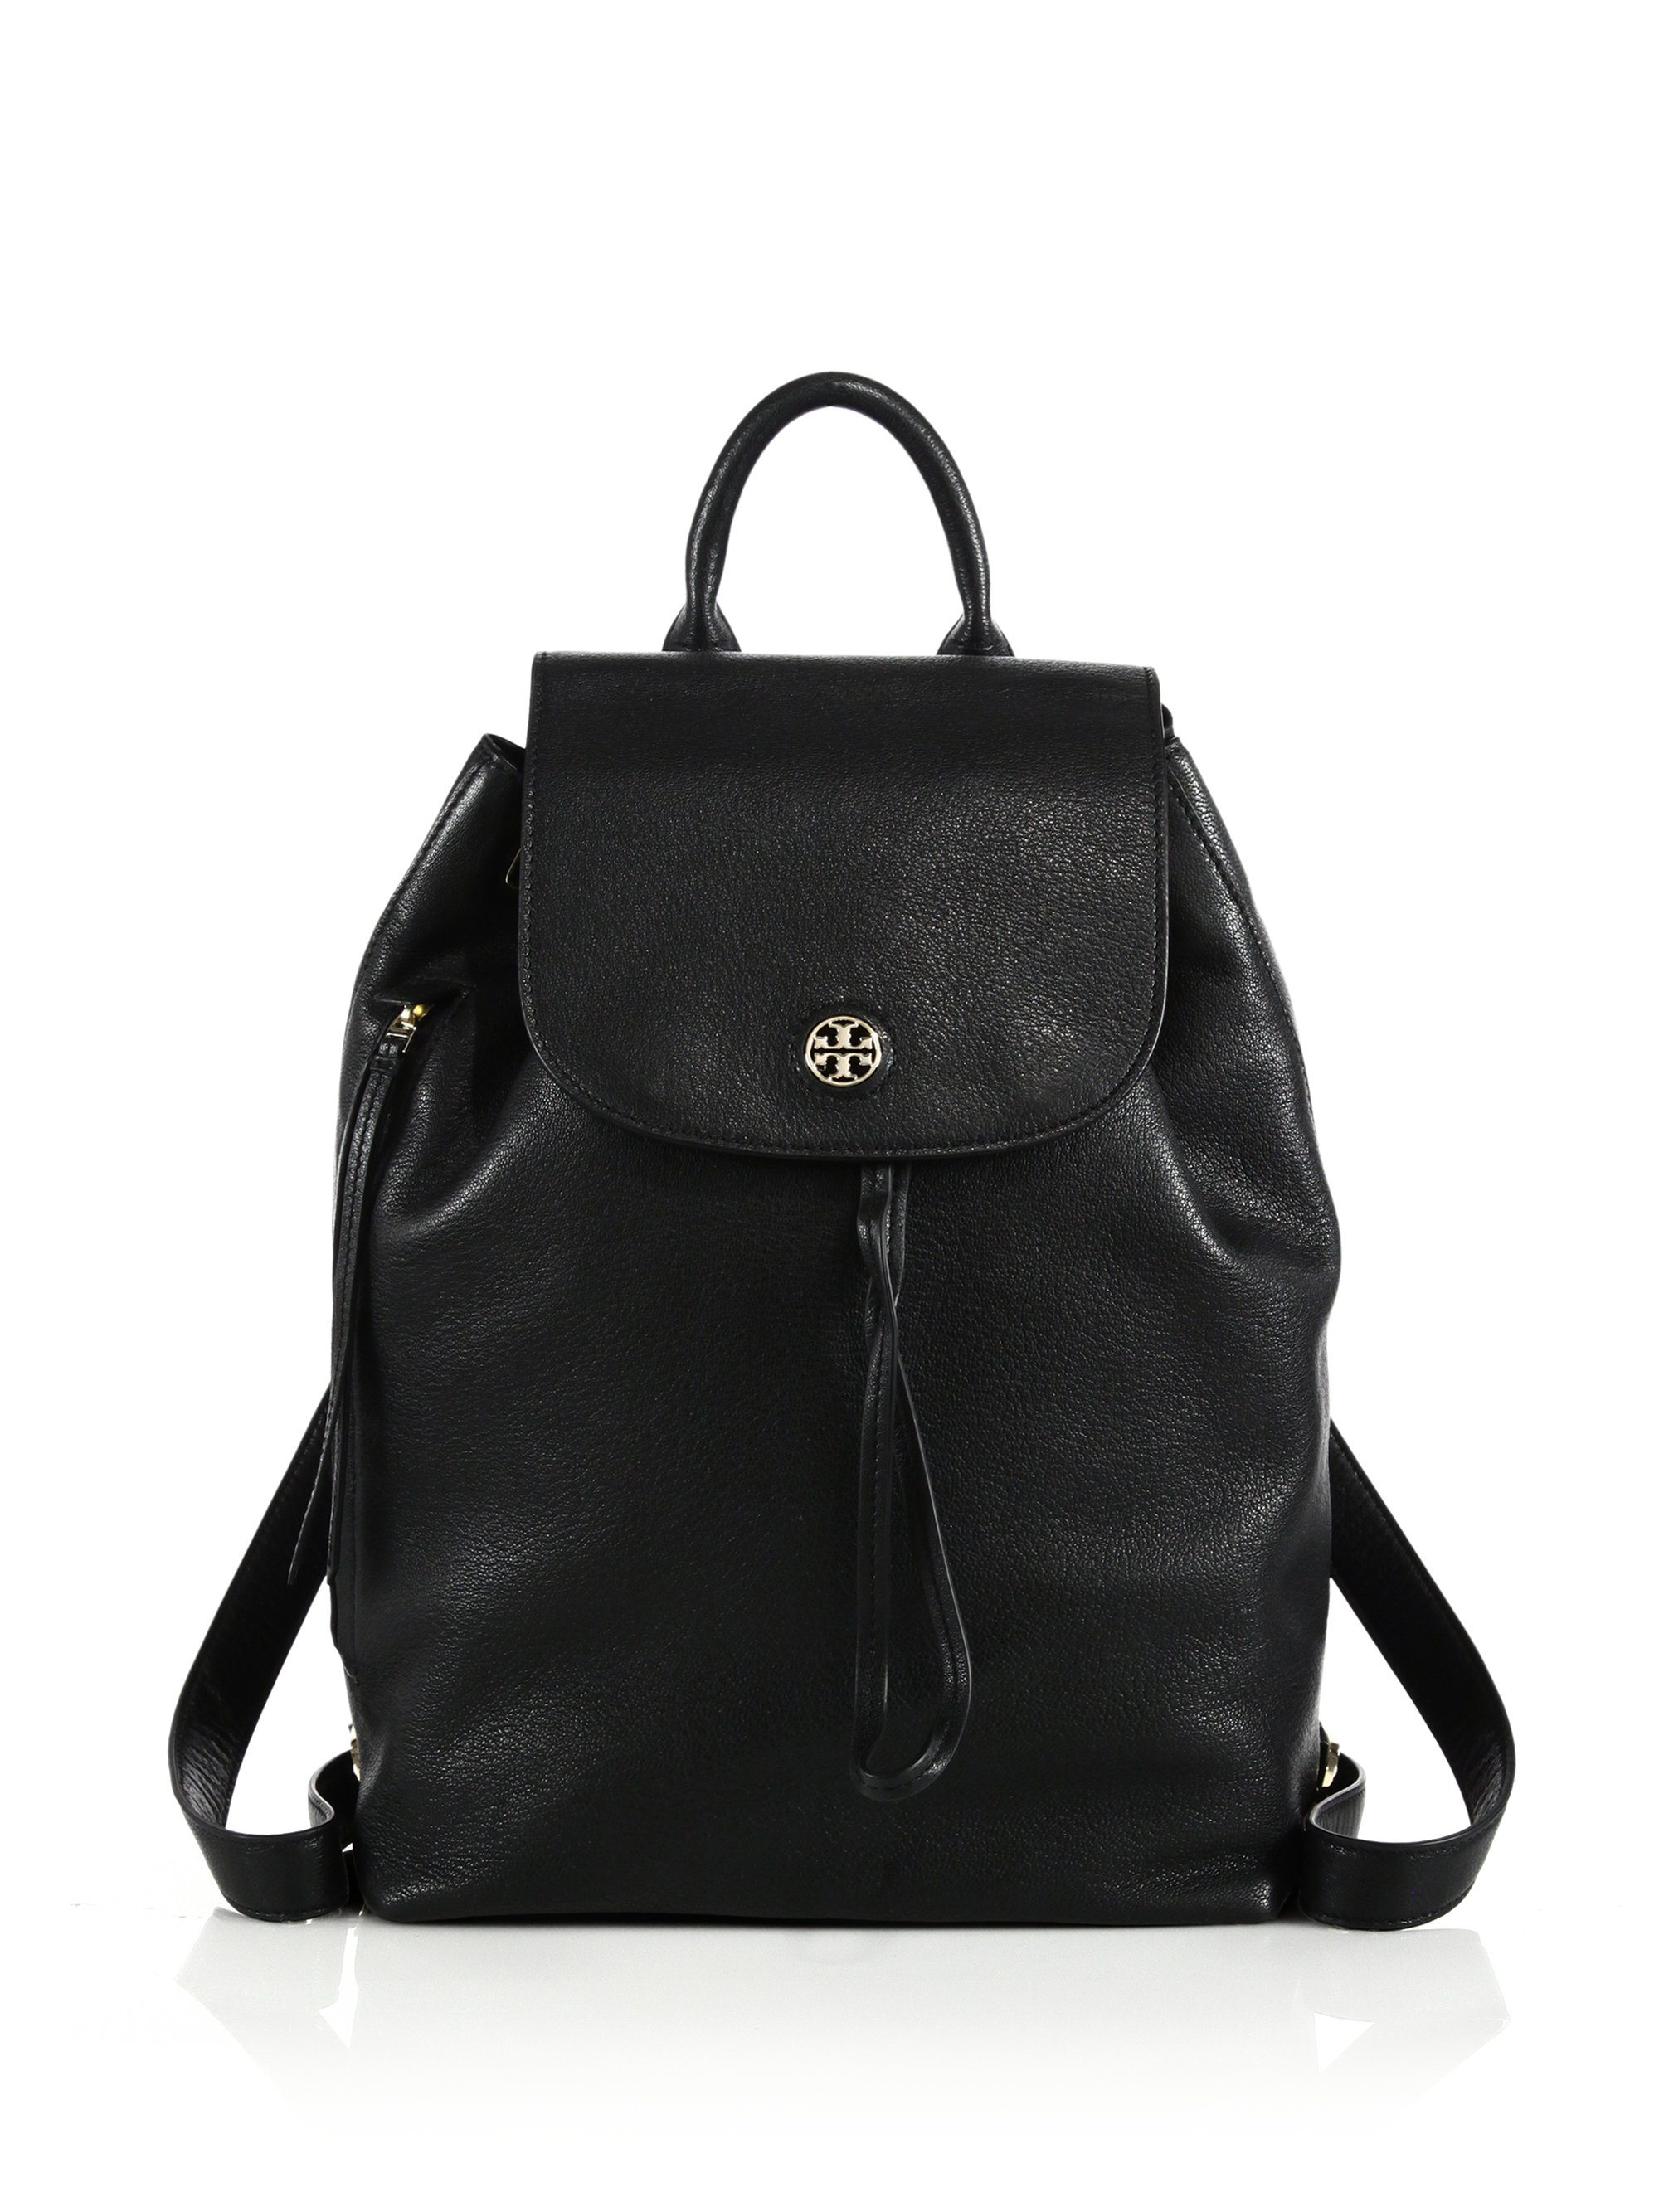 Lyst - Tory Burch Brodie Leather Backpack in Black